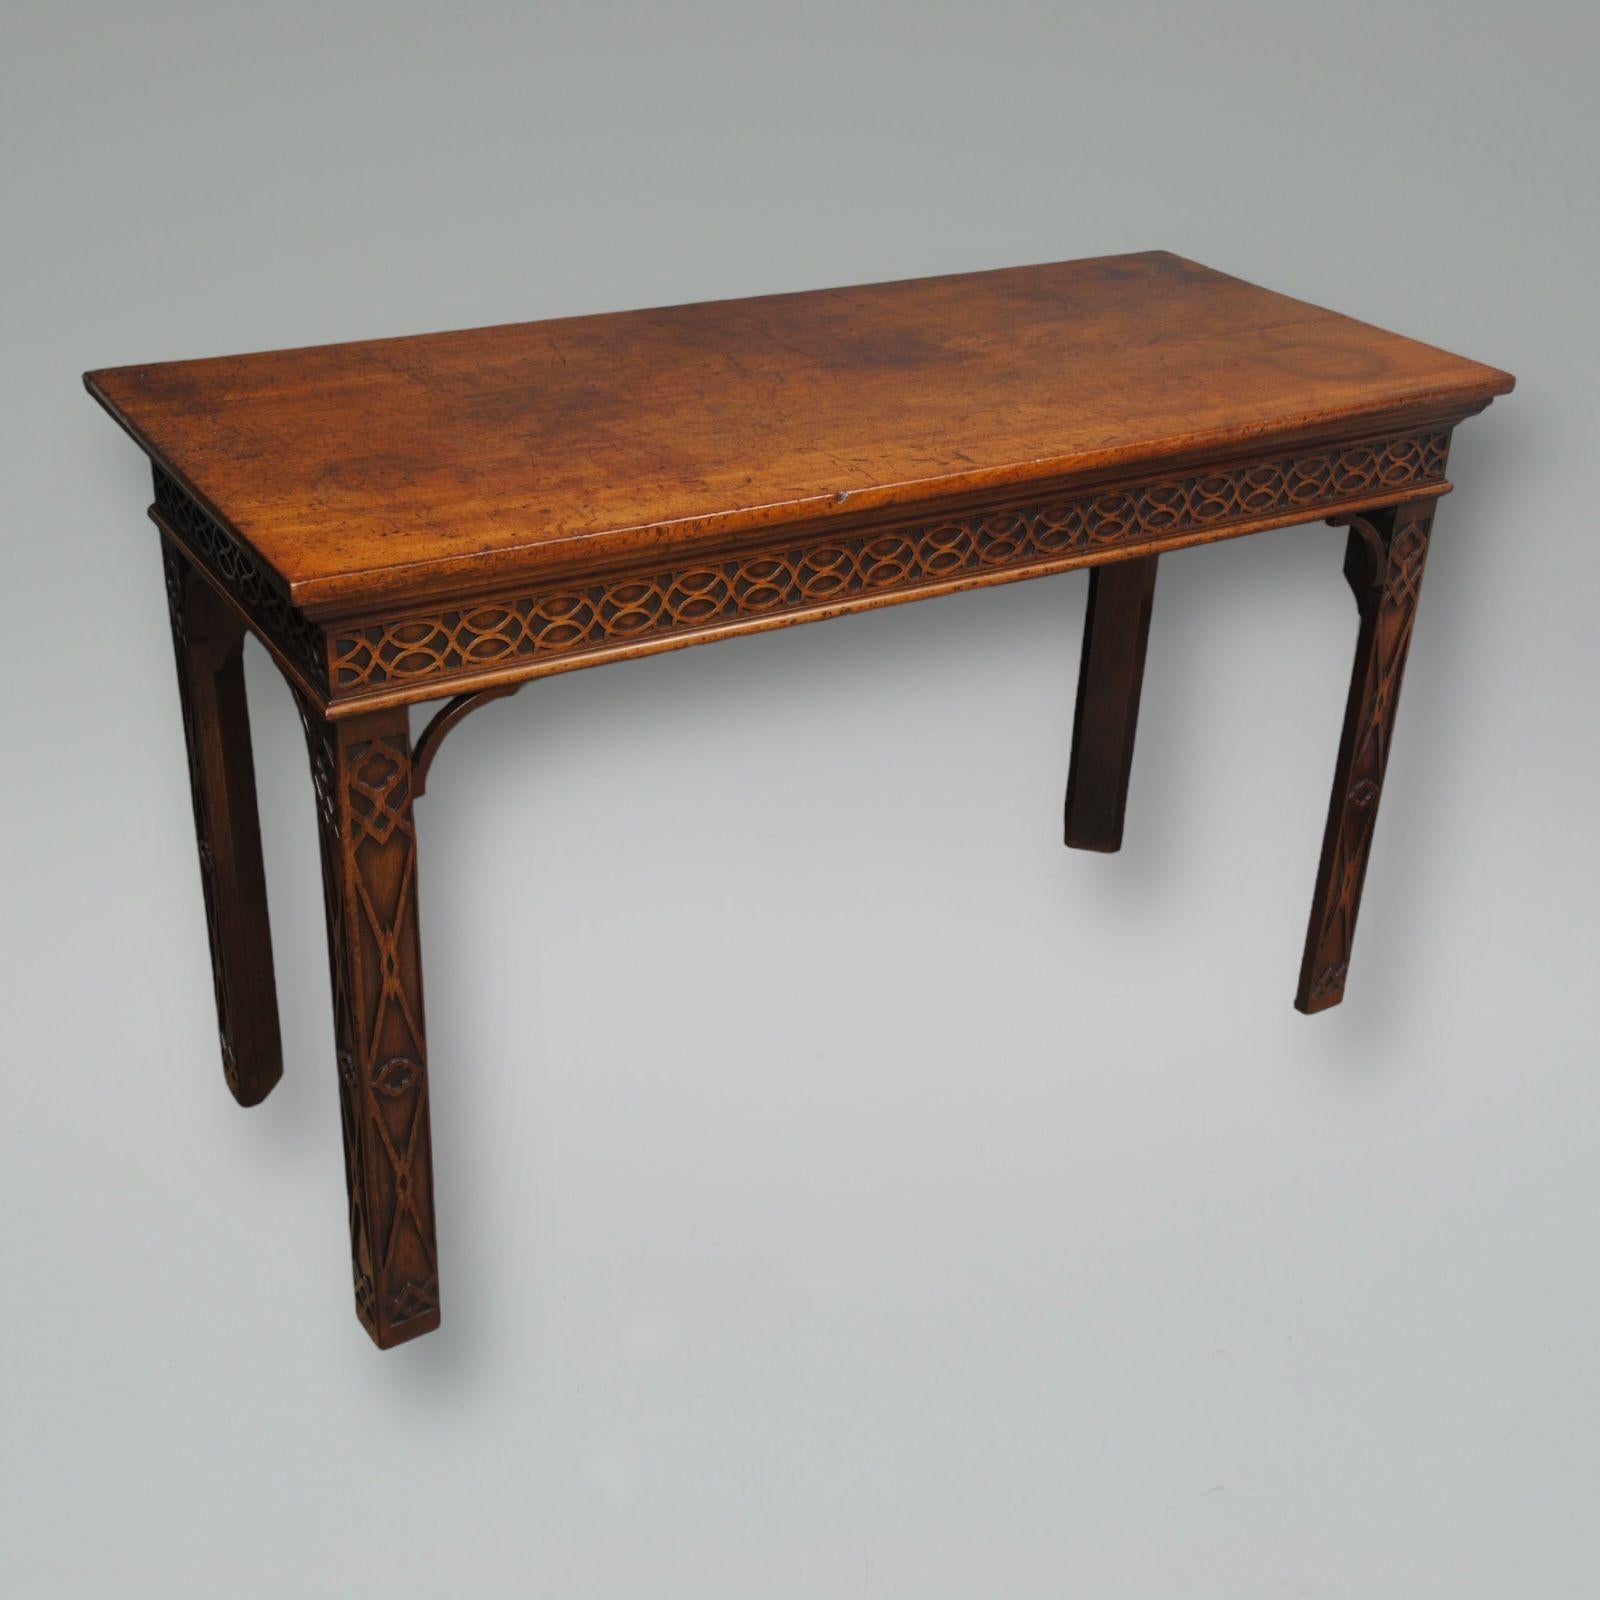 An 18th century mahogany serving table with blind fret decoration on the legs and frieze.
Circa 1770